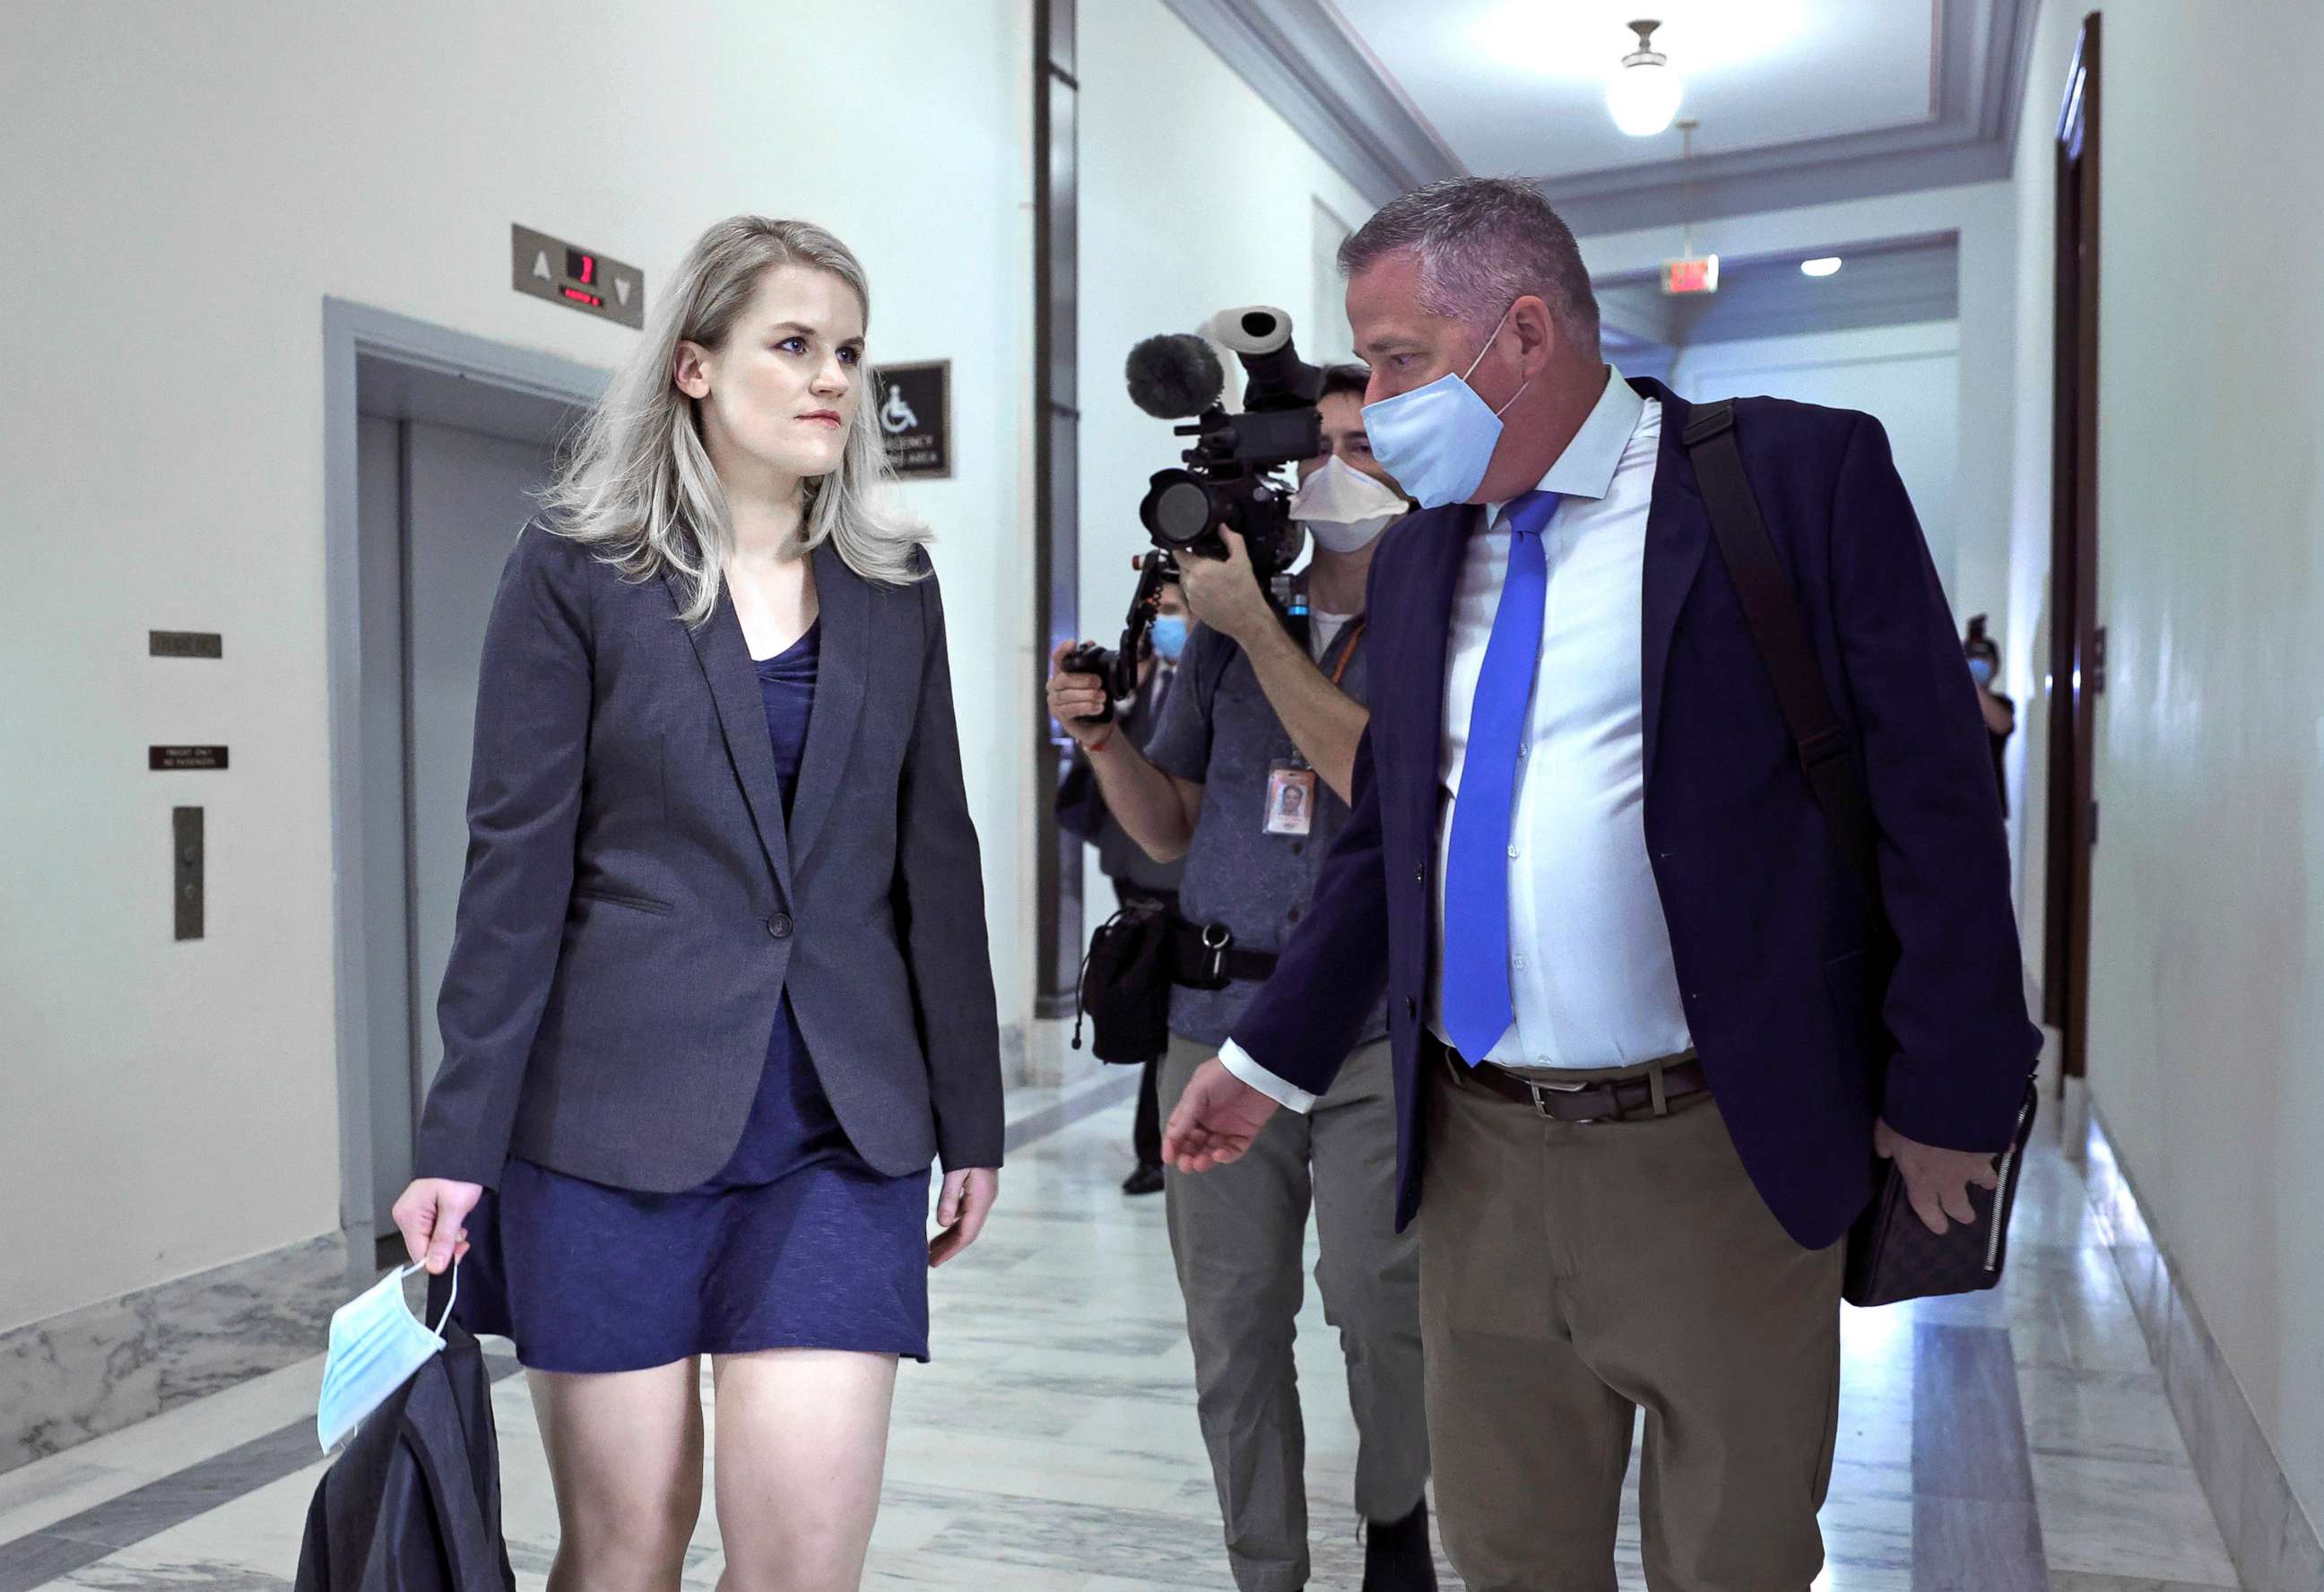 PHOTO: Frances Haugen, former Facebook employee turned whistleblower, arrives to testify before Senate at hearing to examine Facebook's practices, on Capitol Hill on Oct. 5, 2021 in Washington, D.C.